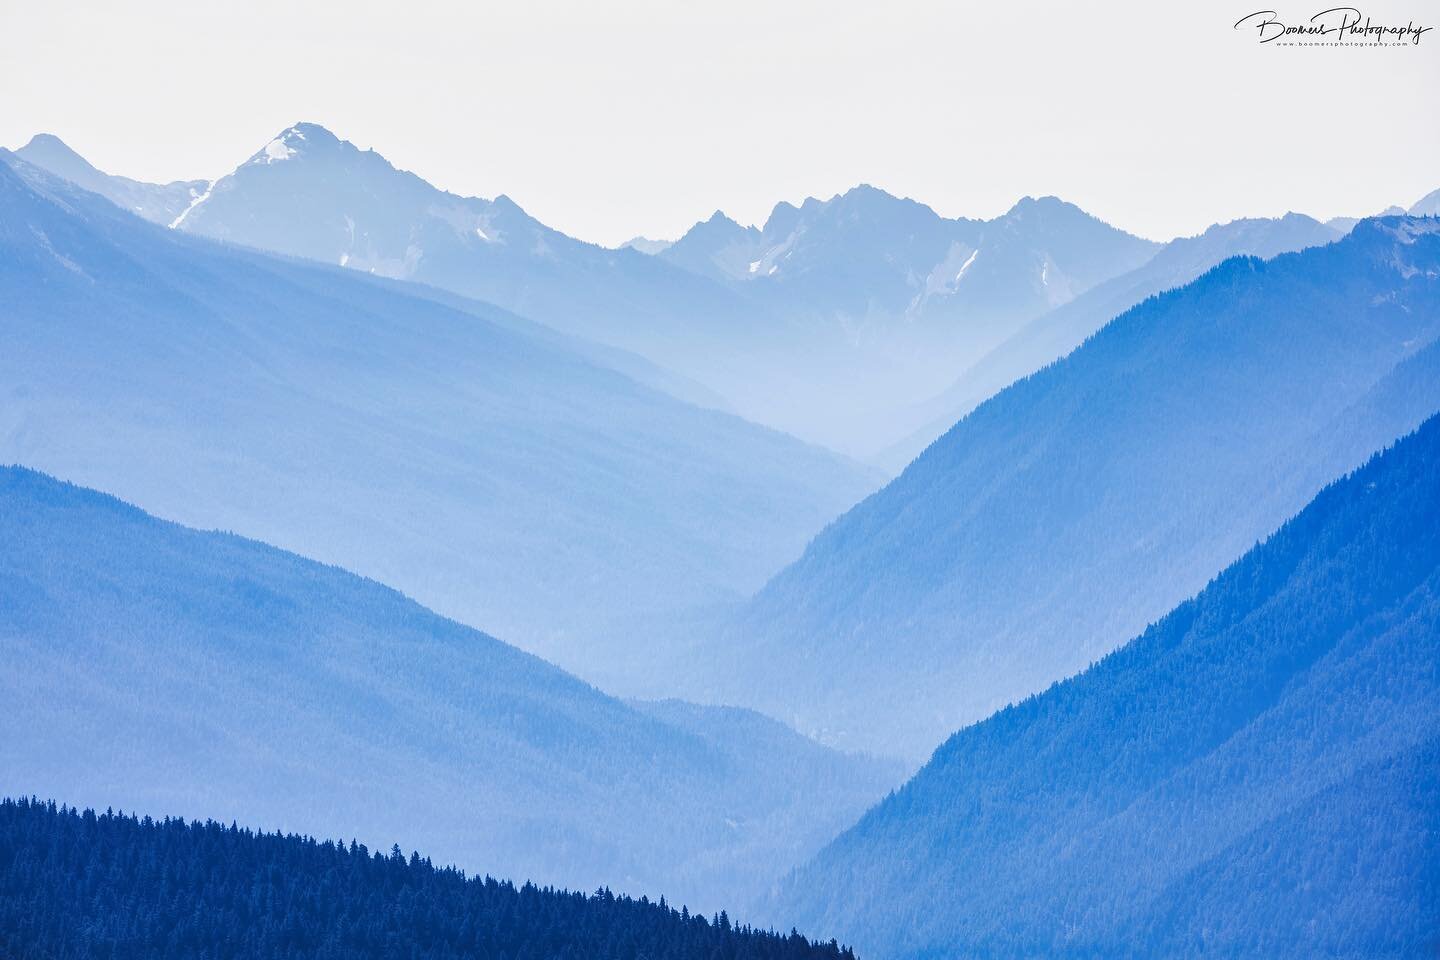 Exploring #washingtonstate
I took this shot at @hurricaneridge in @olympicnationalpark yesterday. Love the way the lines of the mountains come together.